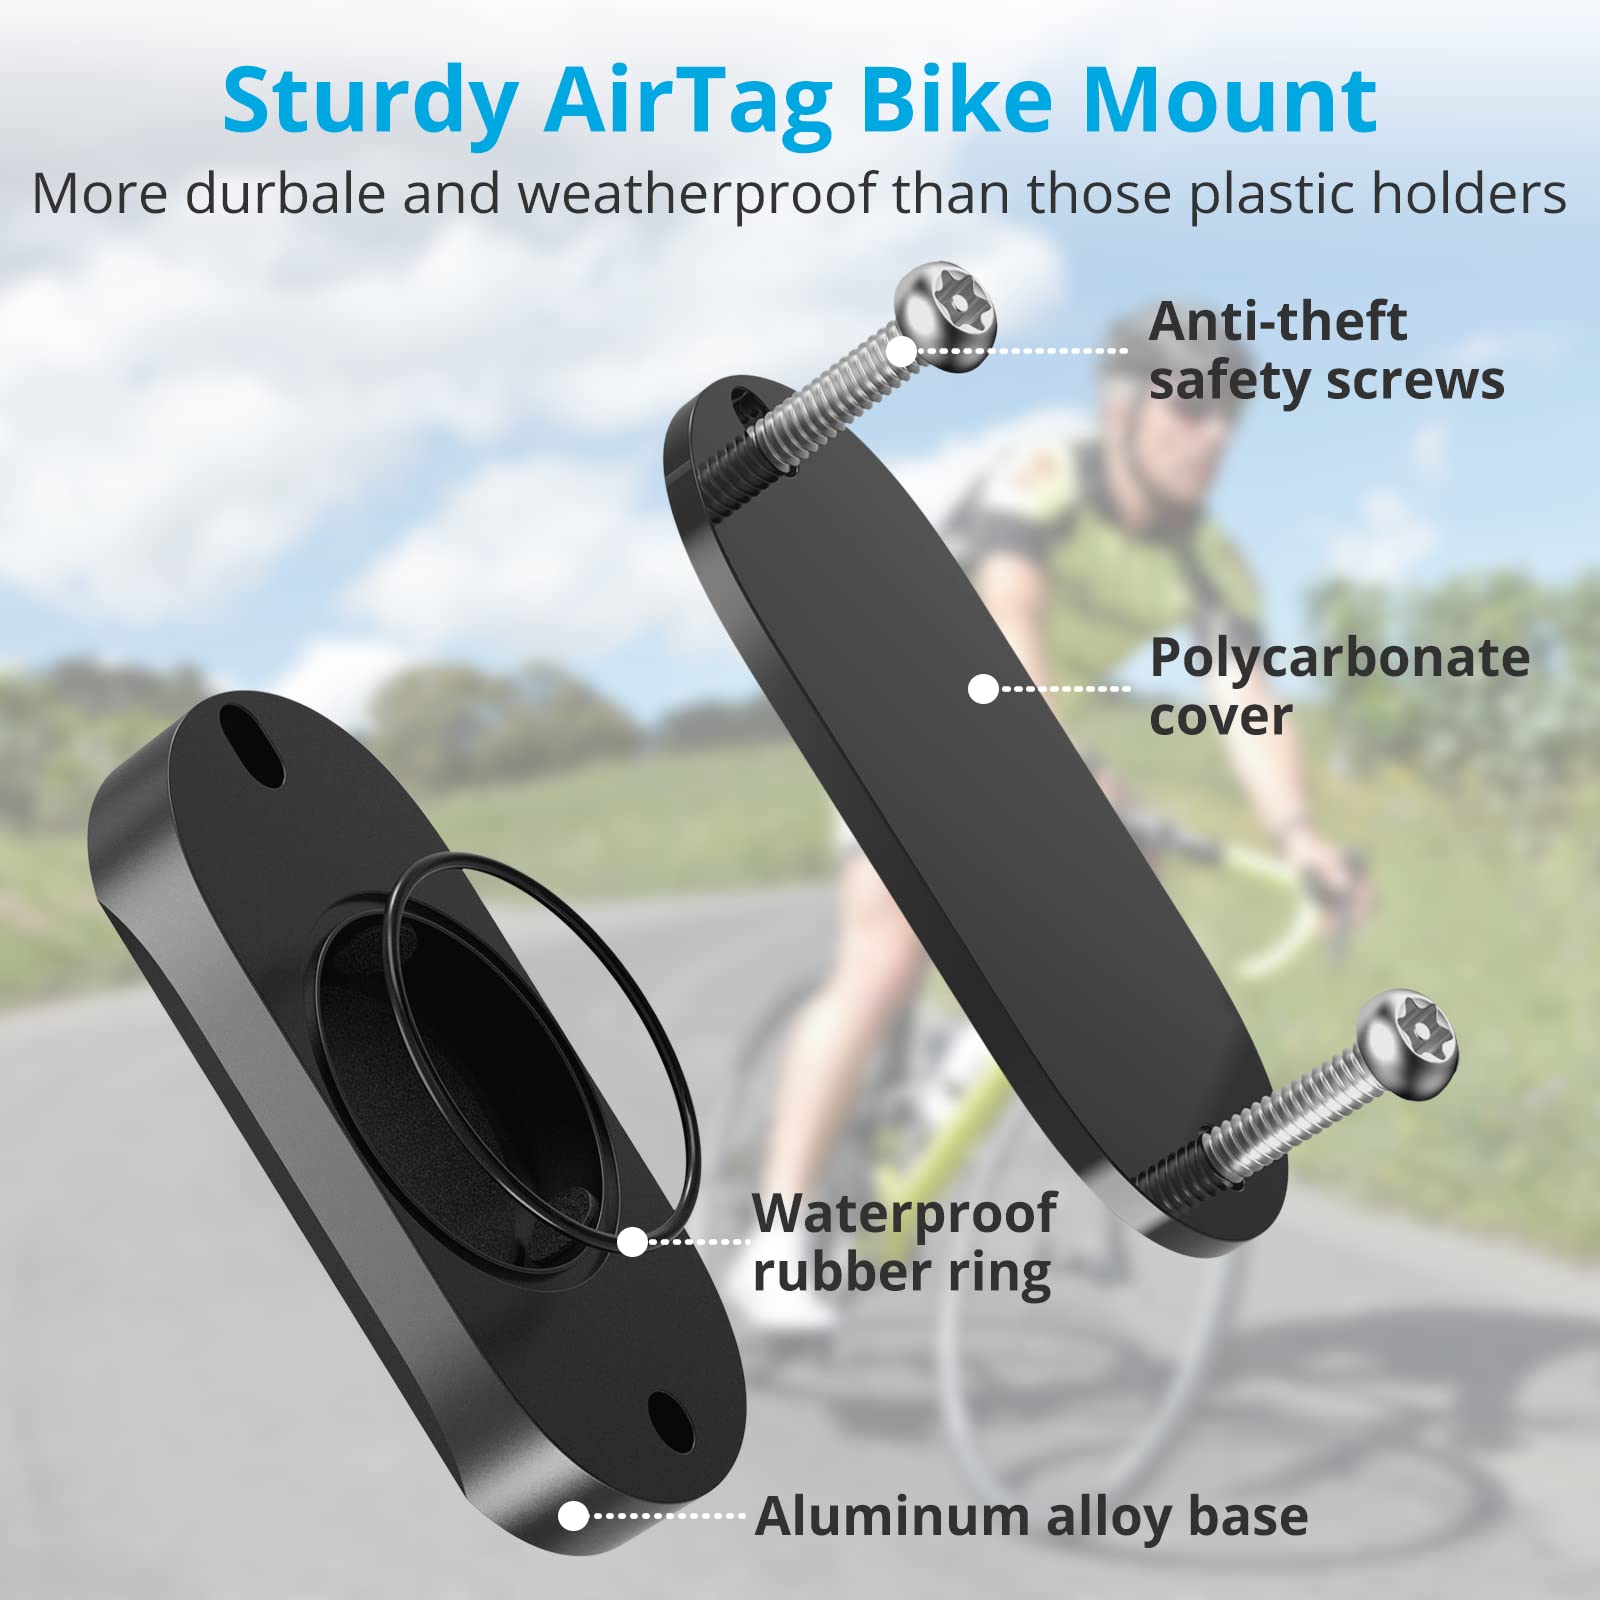 SUPMEGA Bike Mount for AirTag, Waterproof Protective Aluminum Alloy Holder Hides AirTag Under Bicycle Bottle Cage, Bike GPS Tracker, Anti-Theft and Anti-Shake (Security Screws & Allen Key Included)